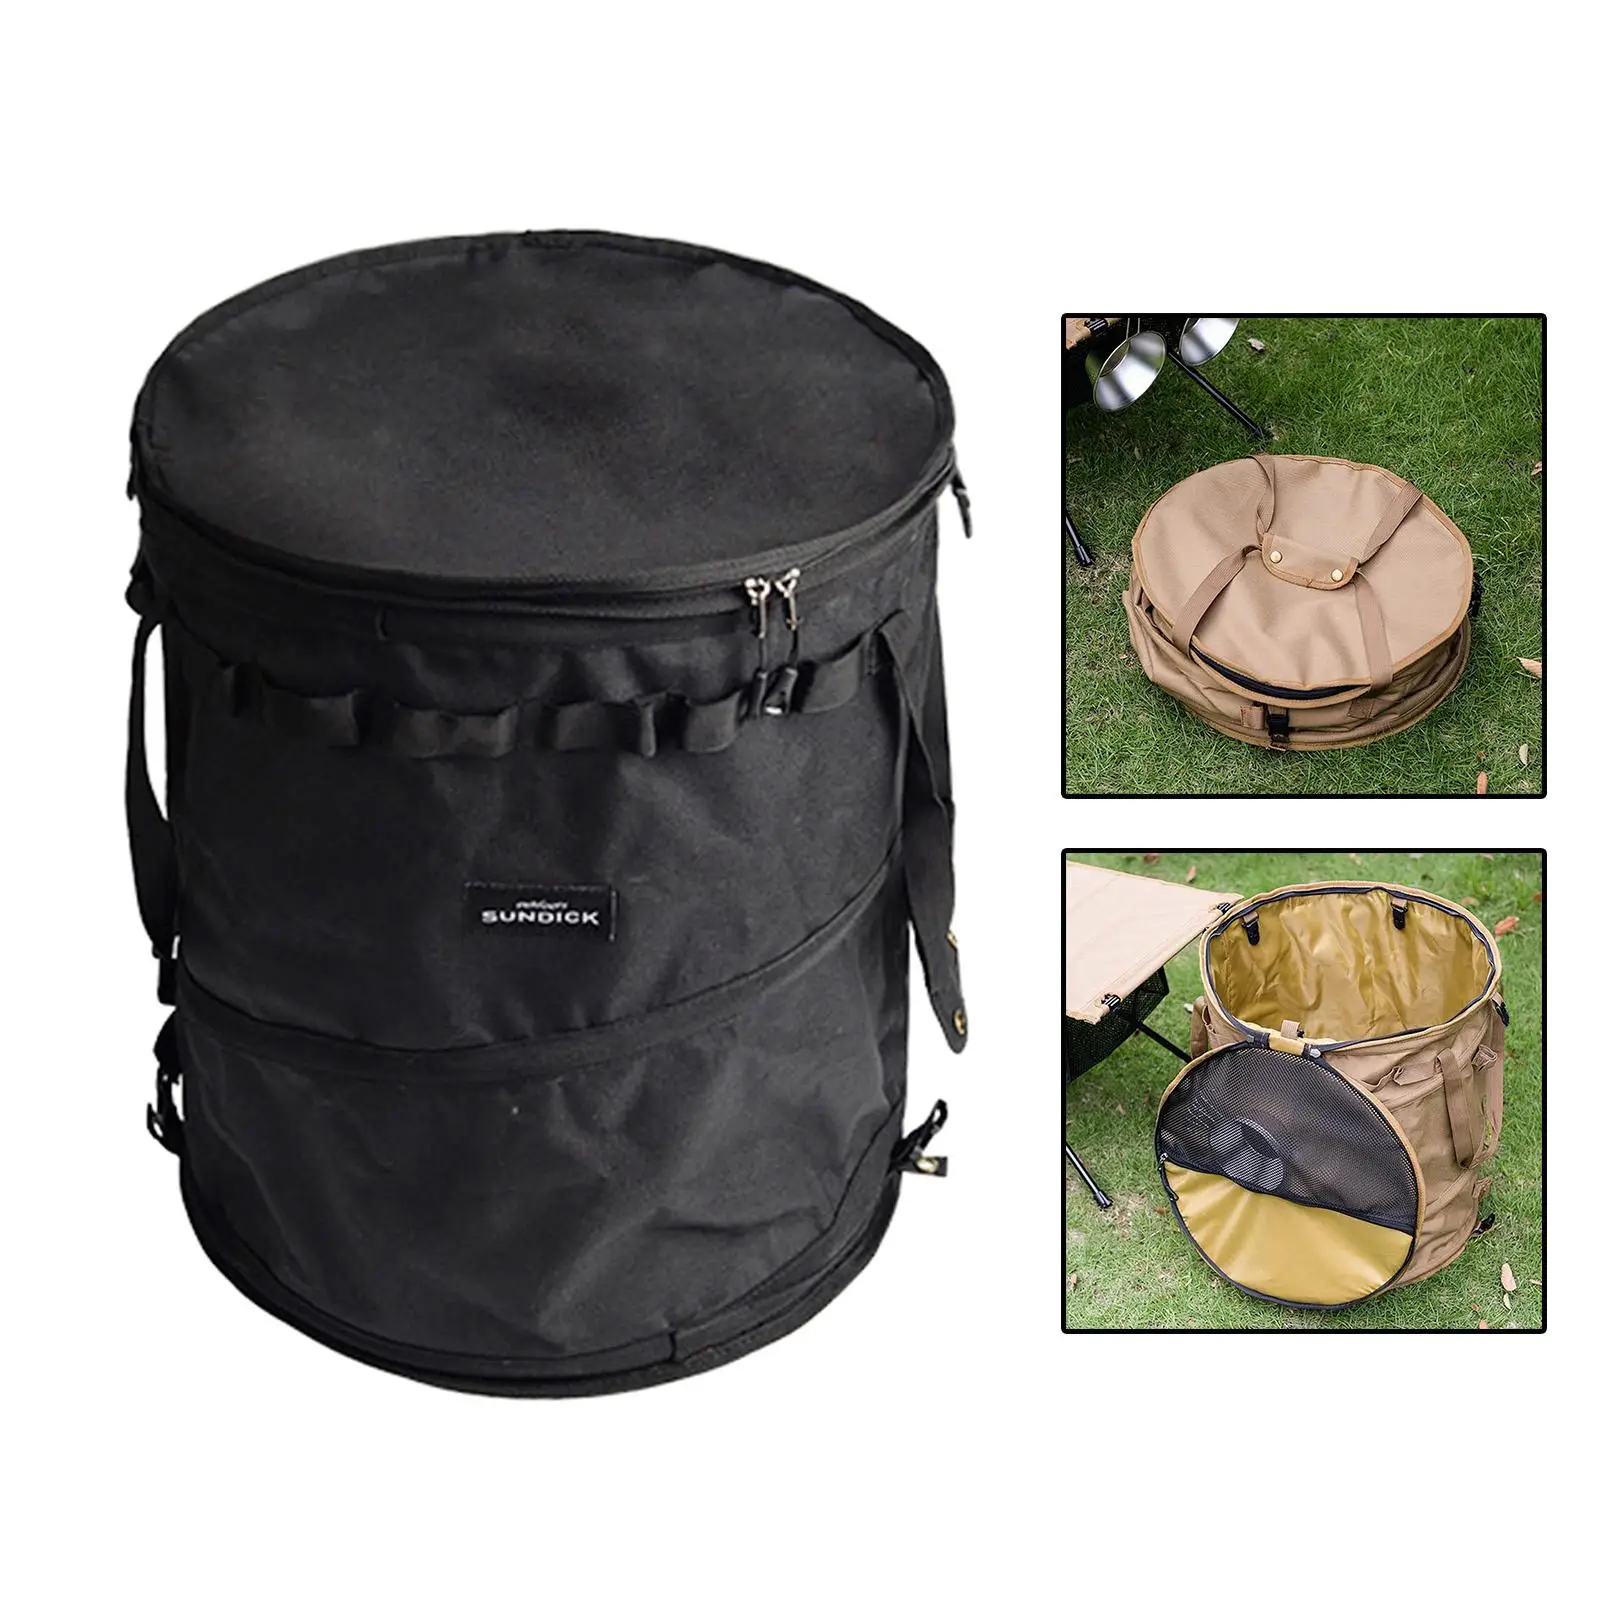 Camping Trash Can Foldable Dirty Clothes Basket Portable for Garden Picnic